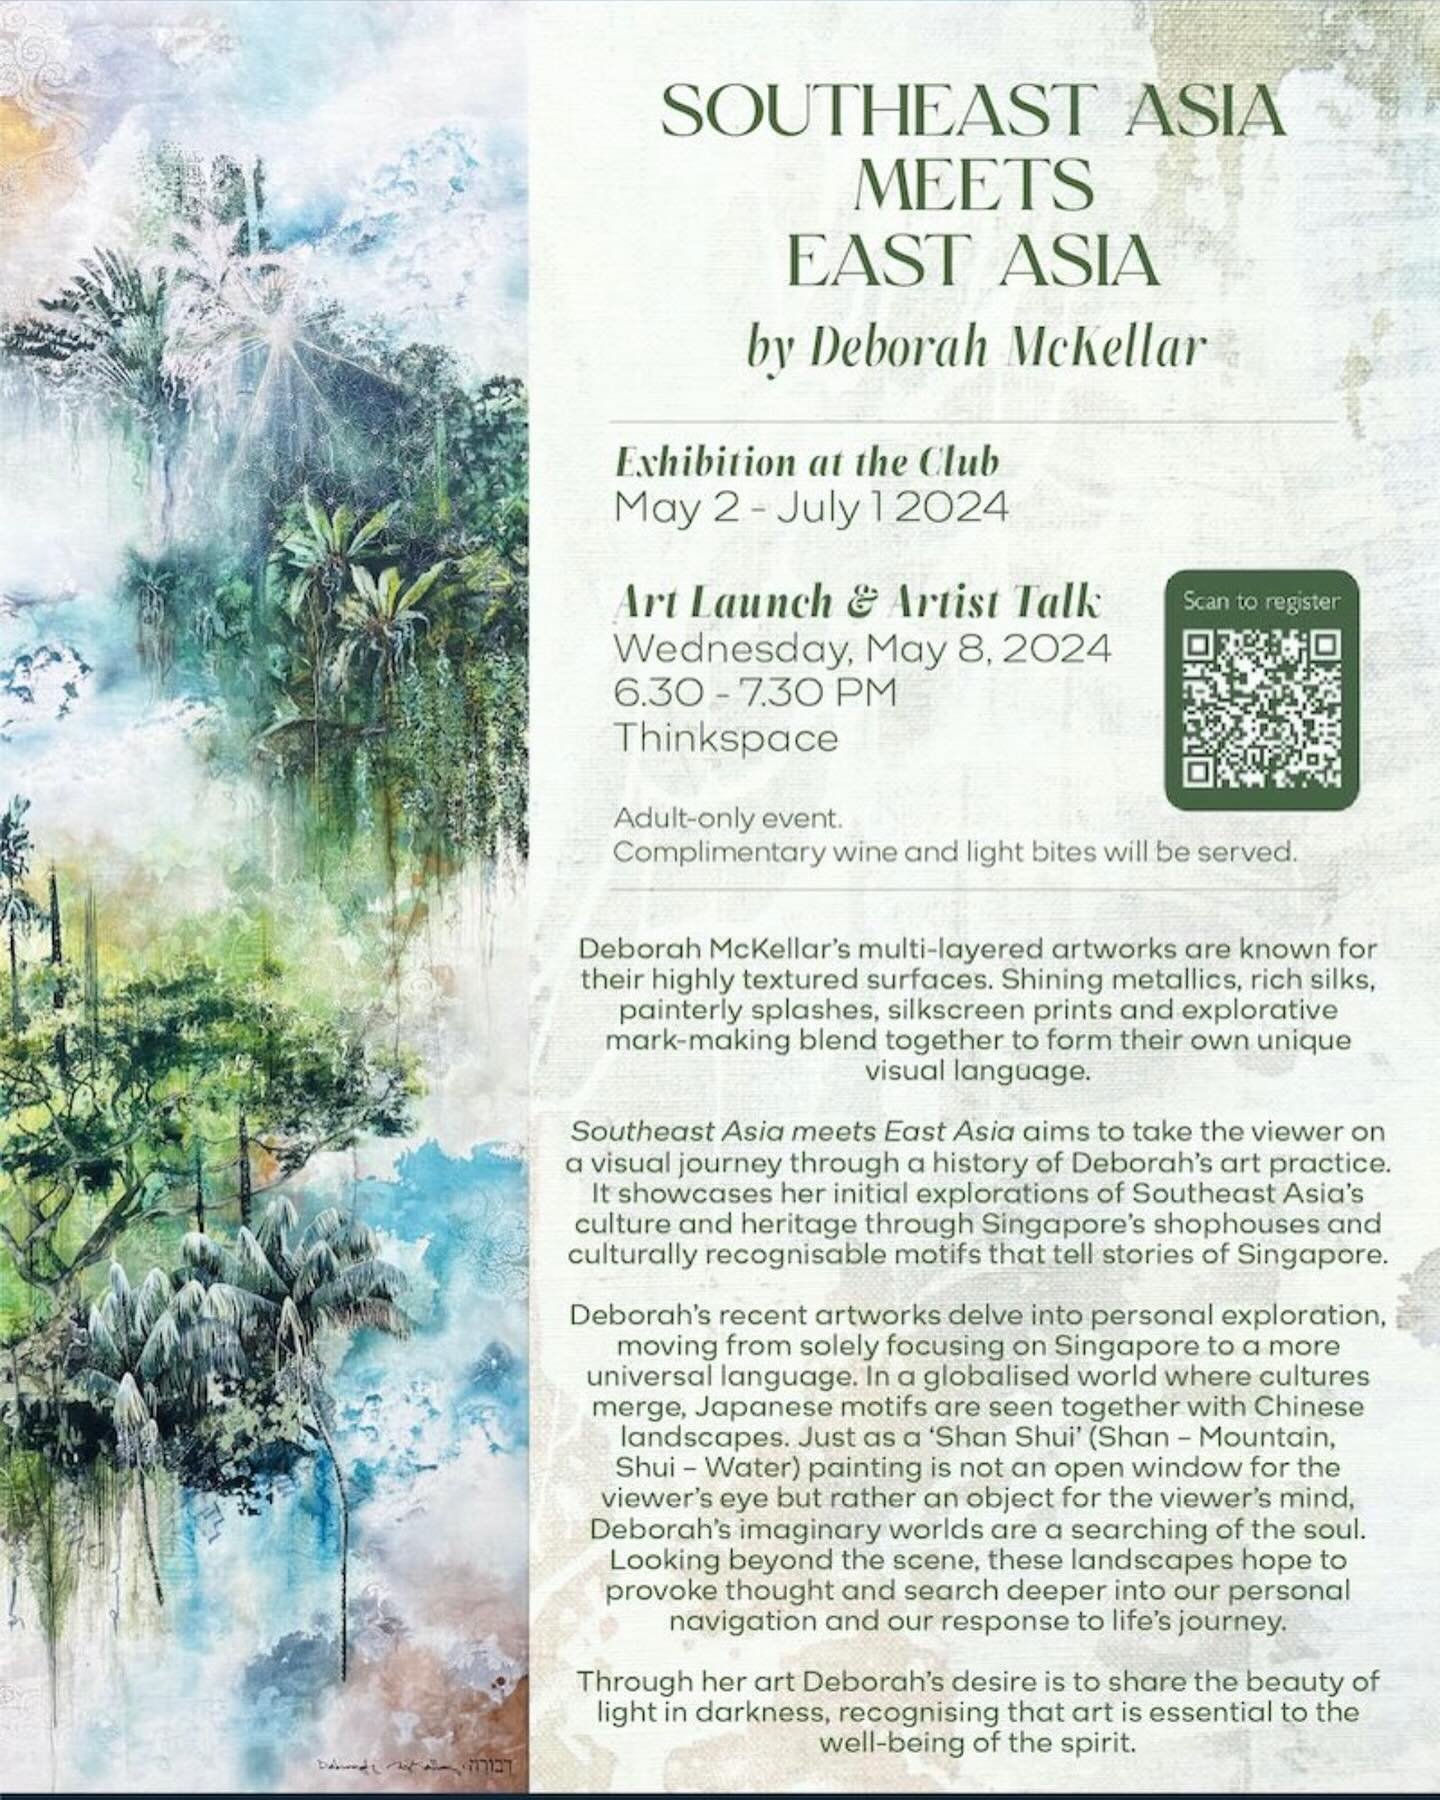 I&rsquo;m really excited about tomorrow nights exhibition opening at The American Club, where I have a large collection of over 50 artworks over 3 different levels - South East Asia meets East Asia. #soloexhibition  #artist #singapore #mixedmedia